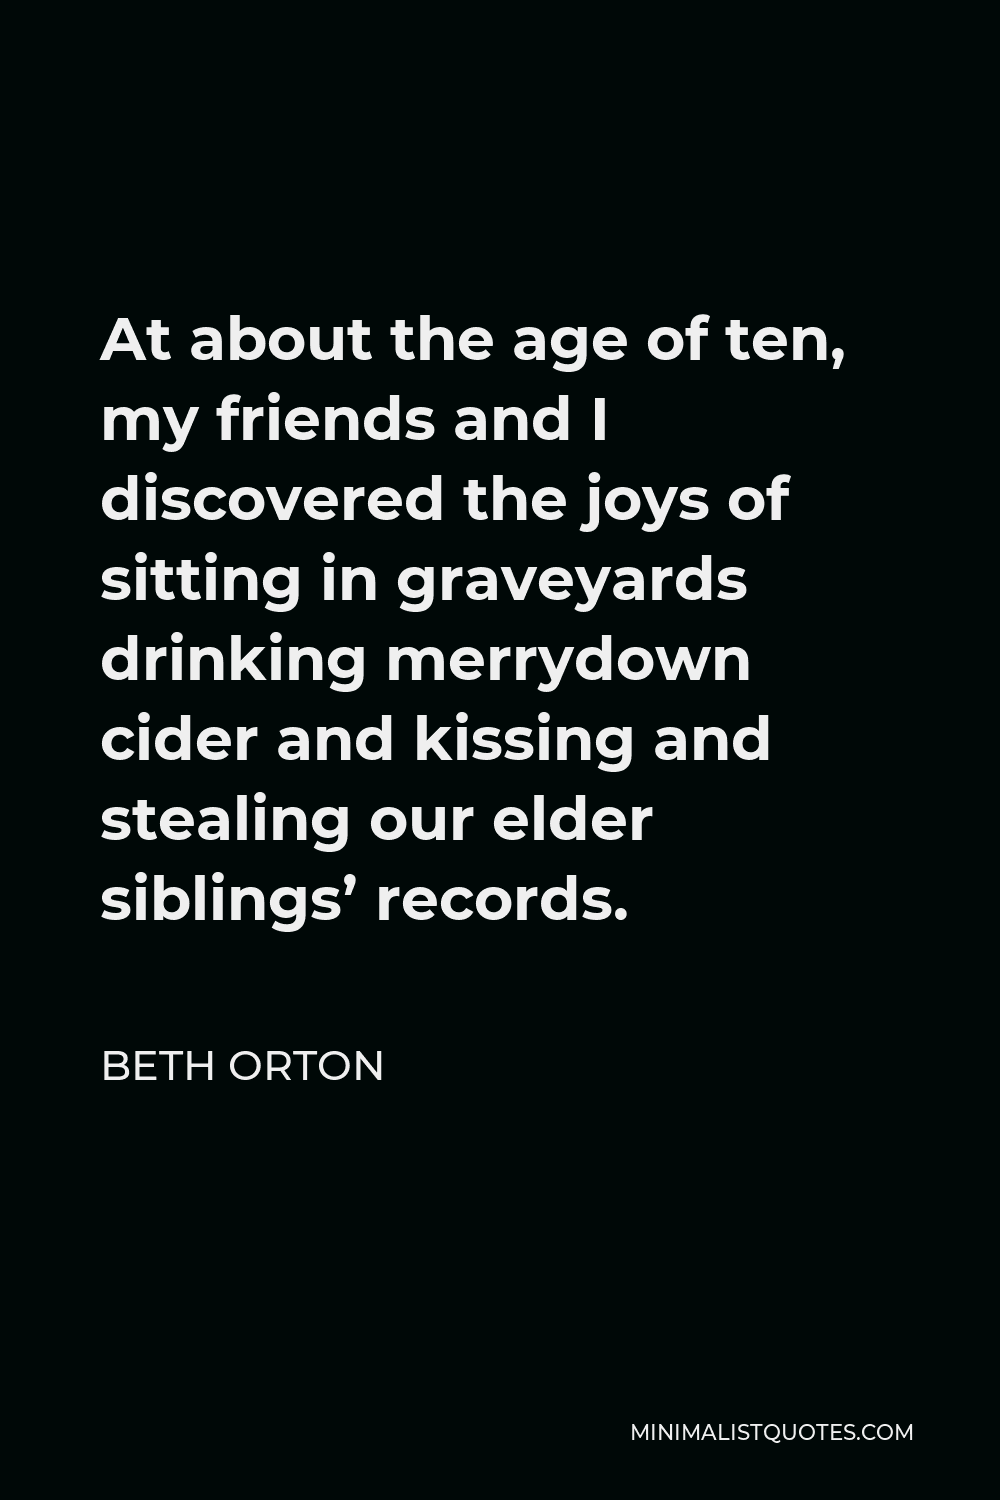 Beth Orton Quote - At about the age of ten, my friends and I discovered the joys of sitting in graveyards drinking merrydown cider and kissing and stealing our elder siblings’ records.